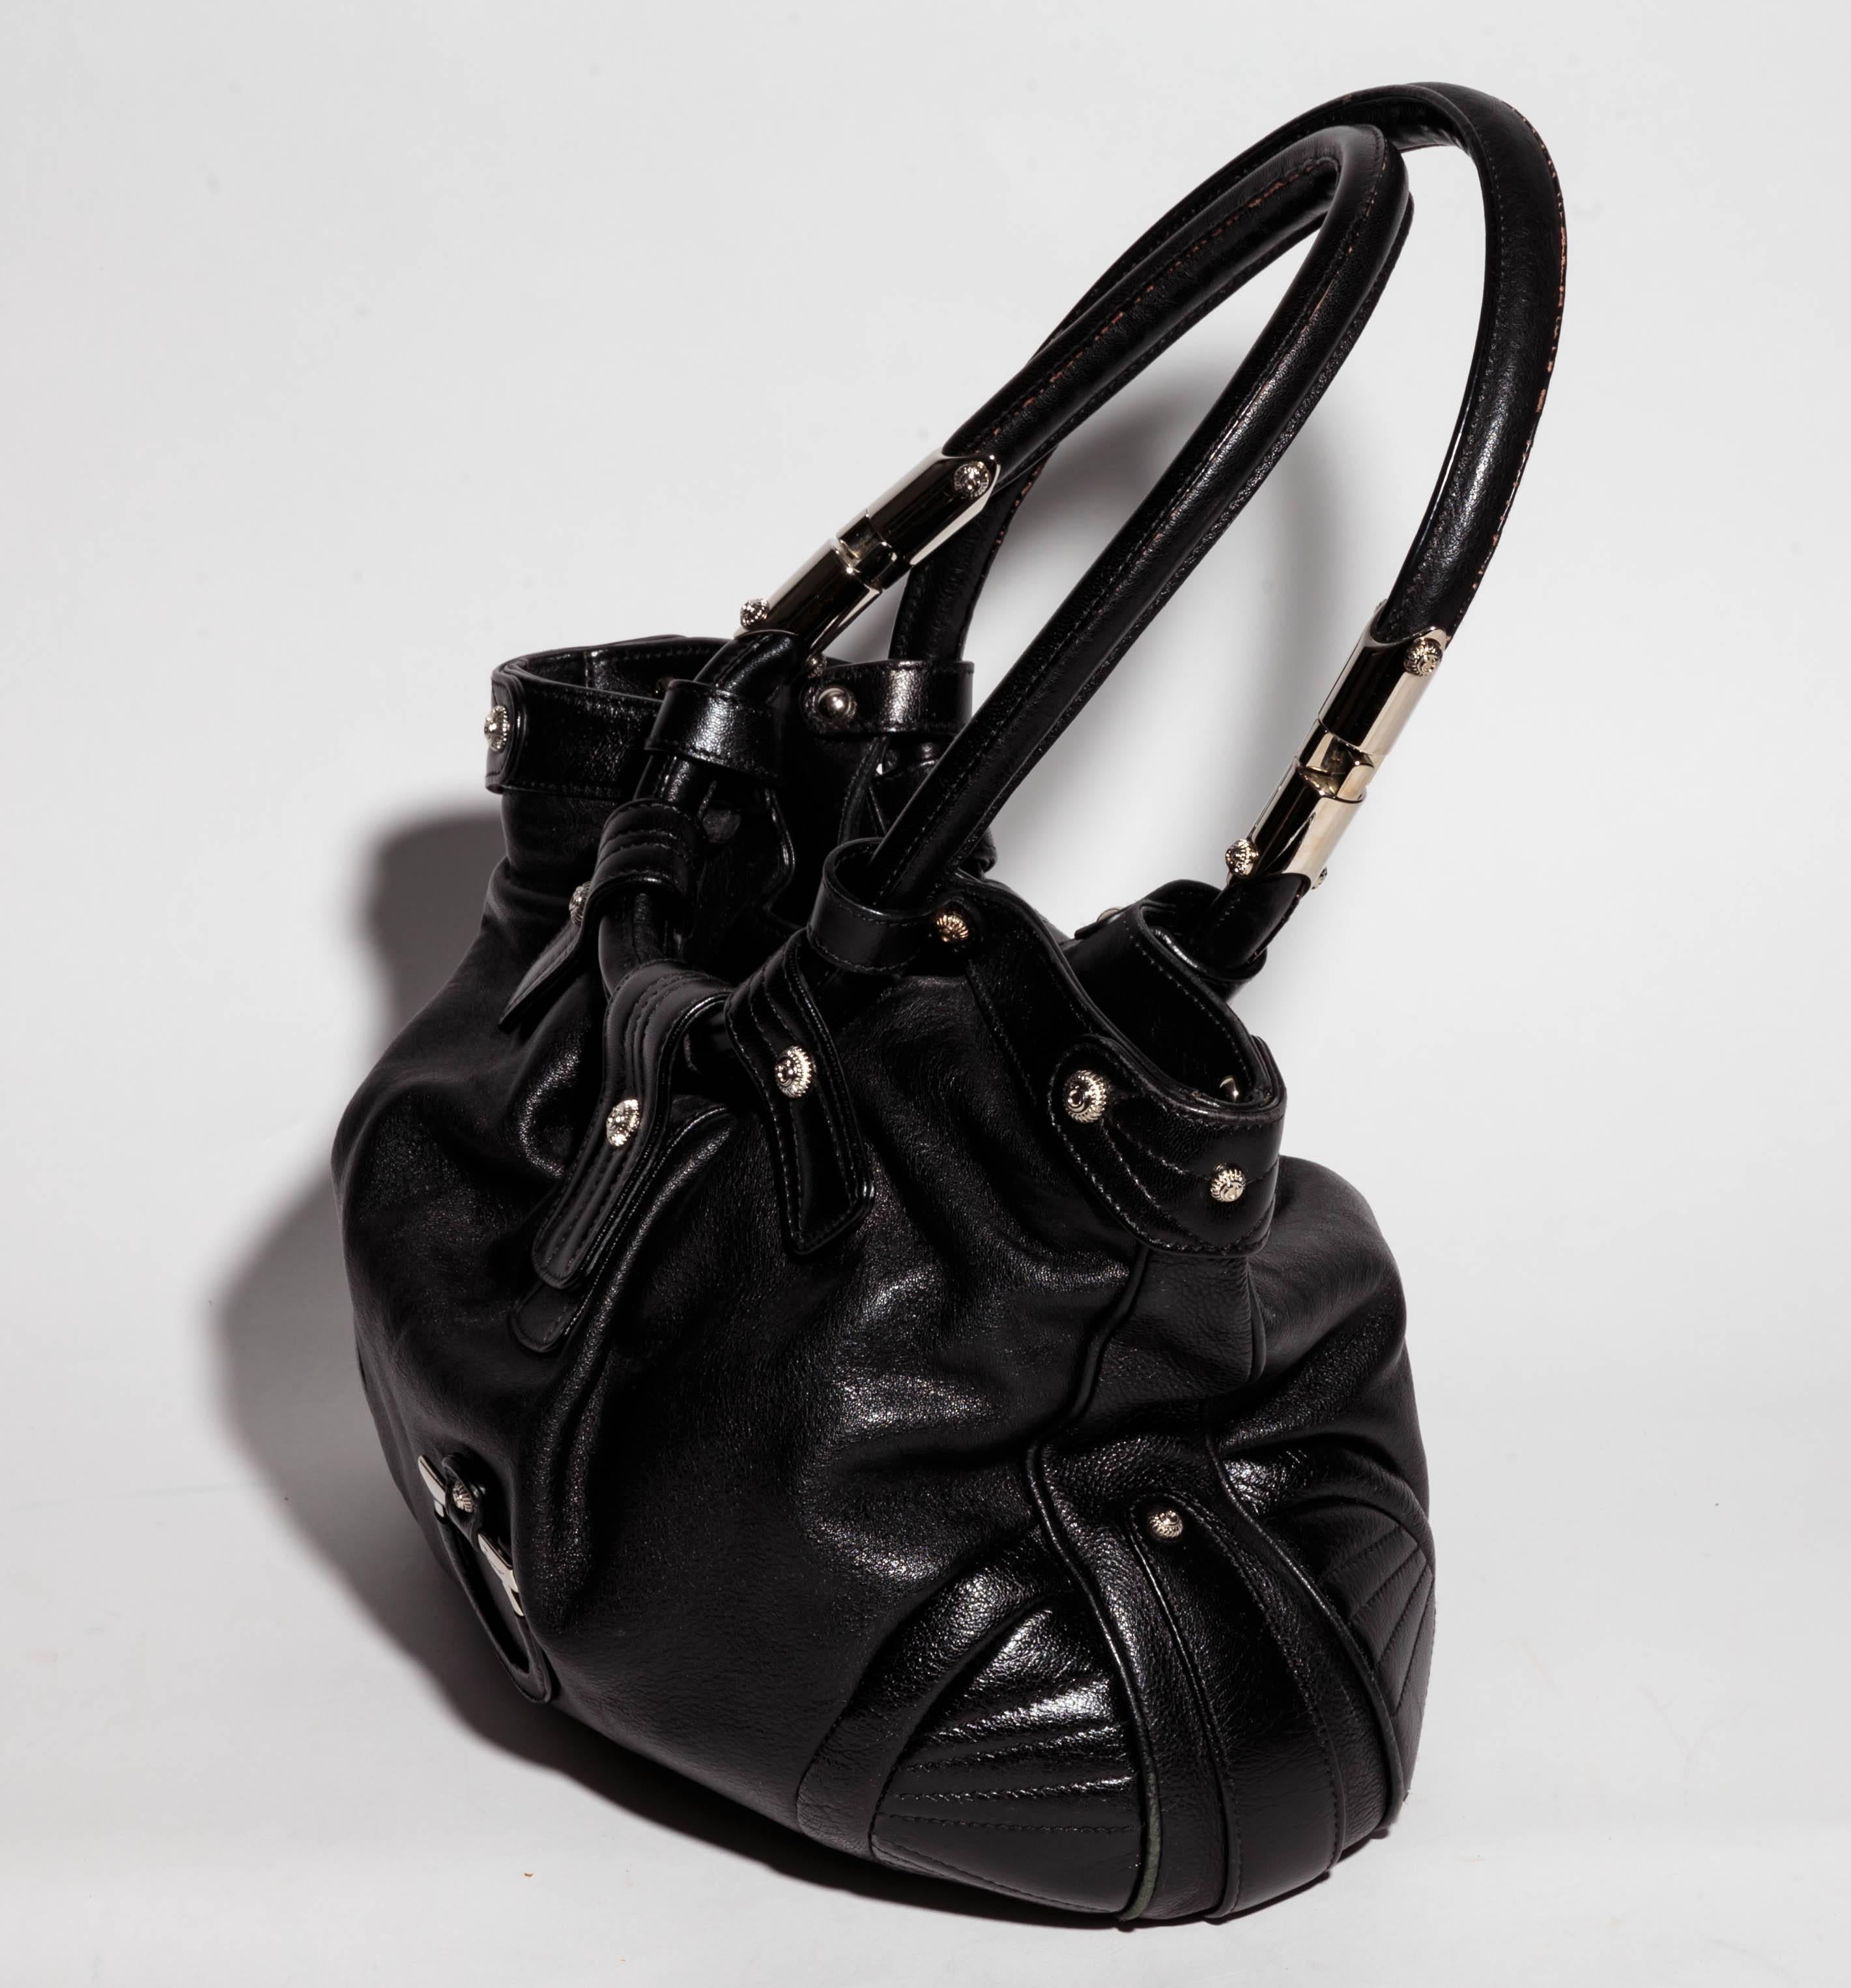 Ferragamo Black Leather Shoulder Bag In Good Condition For Sale In Westhampton Beach, NY